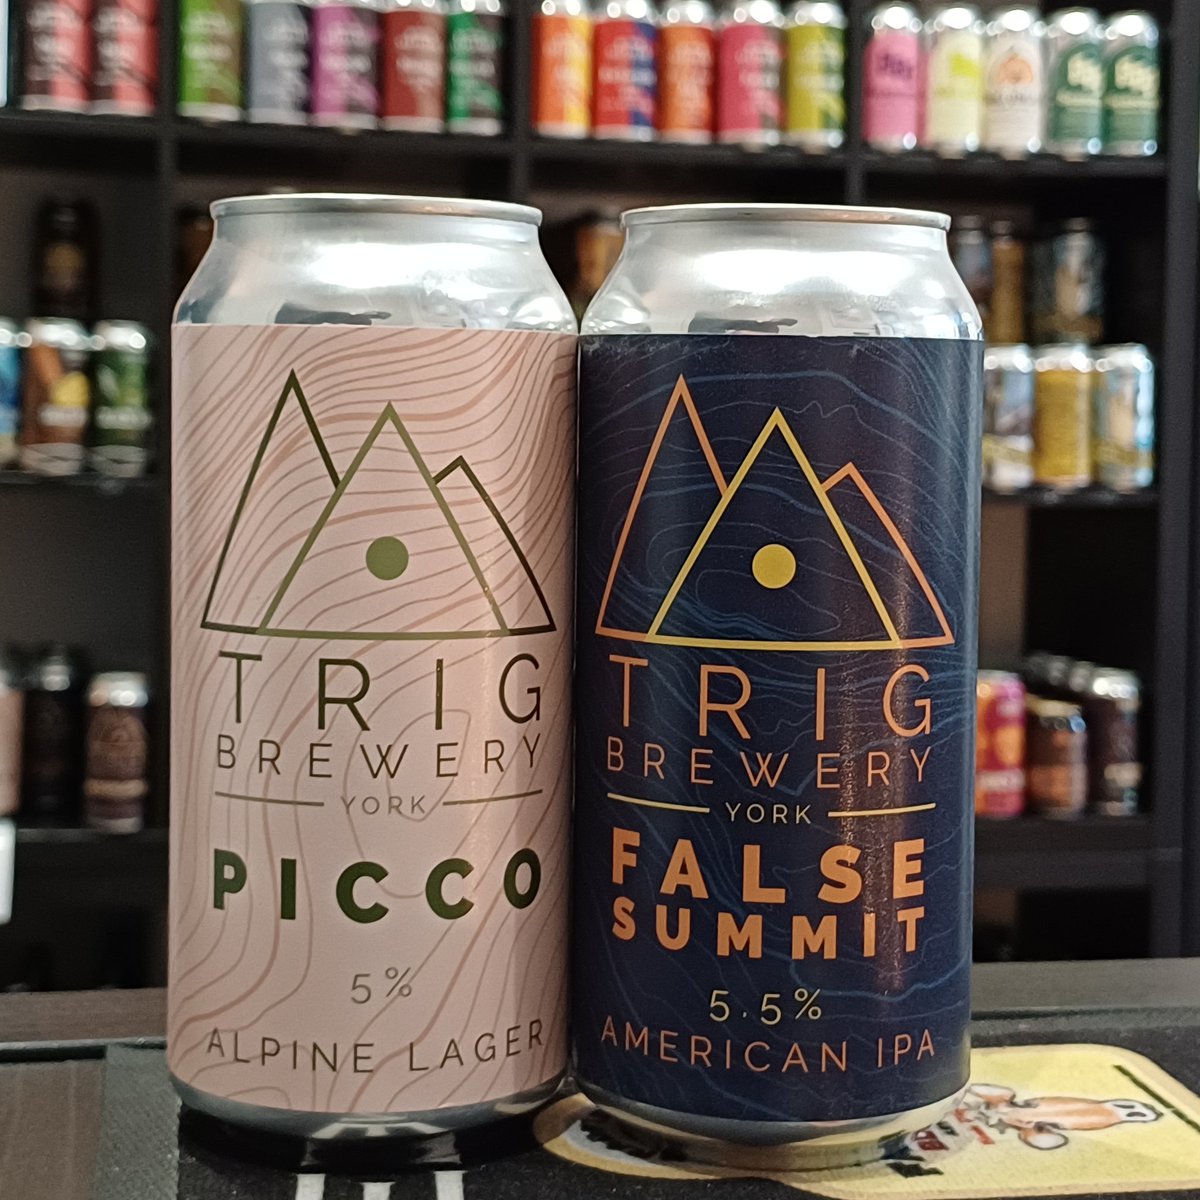 More fresh cans from @TrigBrewery Their citrus, piney American IPA returns along with a new Alpine Lager with classic German hops and a Swiss yeast to give subtle floral and fruity flavours. Open today until 5pm. #sheffieldissuper #beeroclock #indiebeershop #barnsleyisbrill